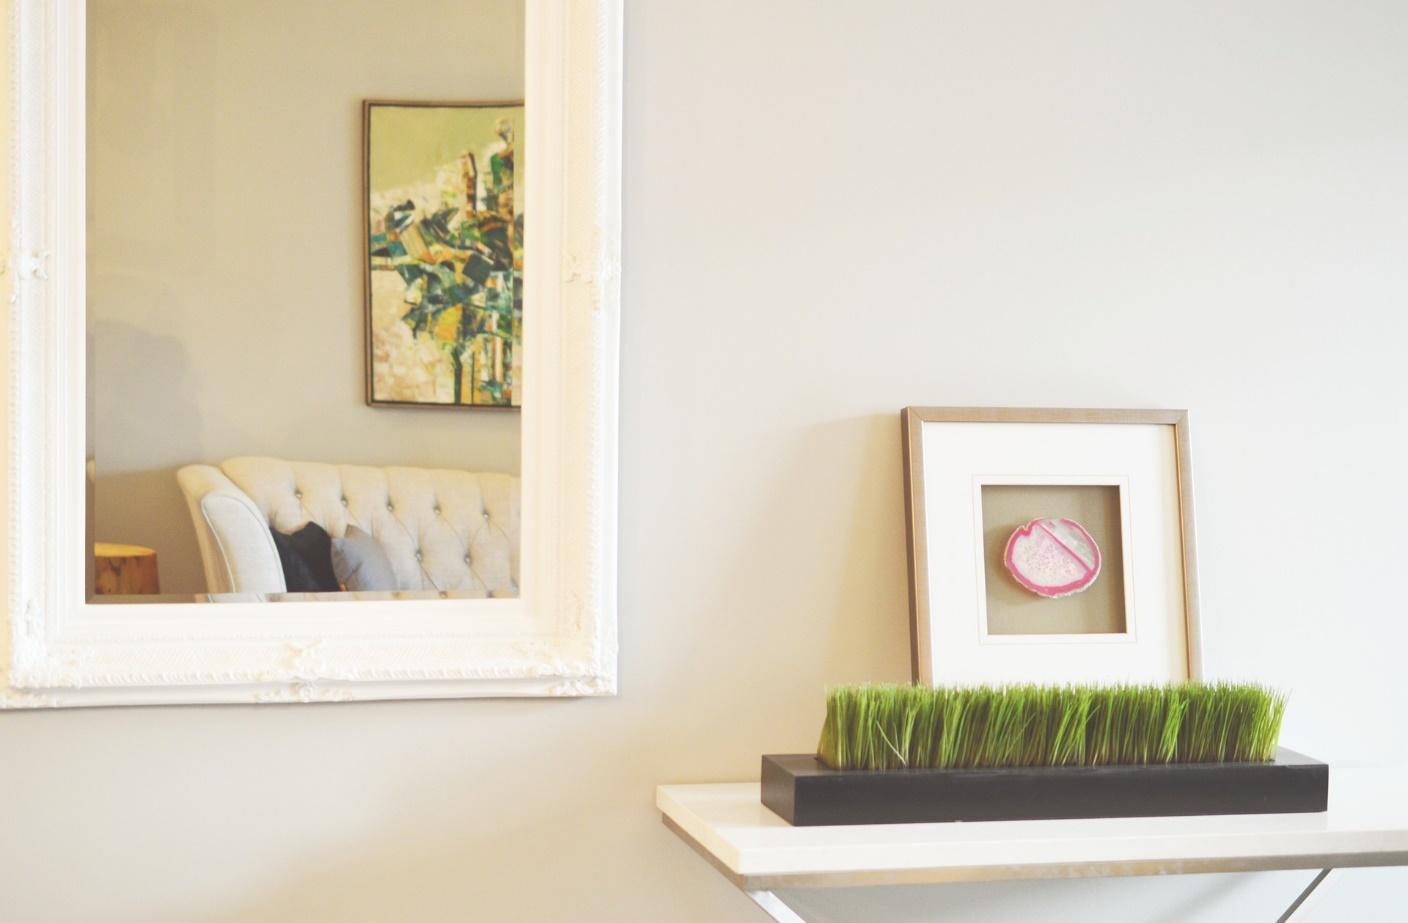 A mirror in a white frame with a shelf next to it.